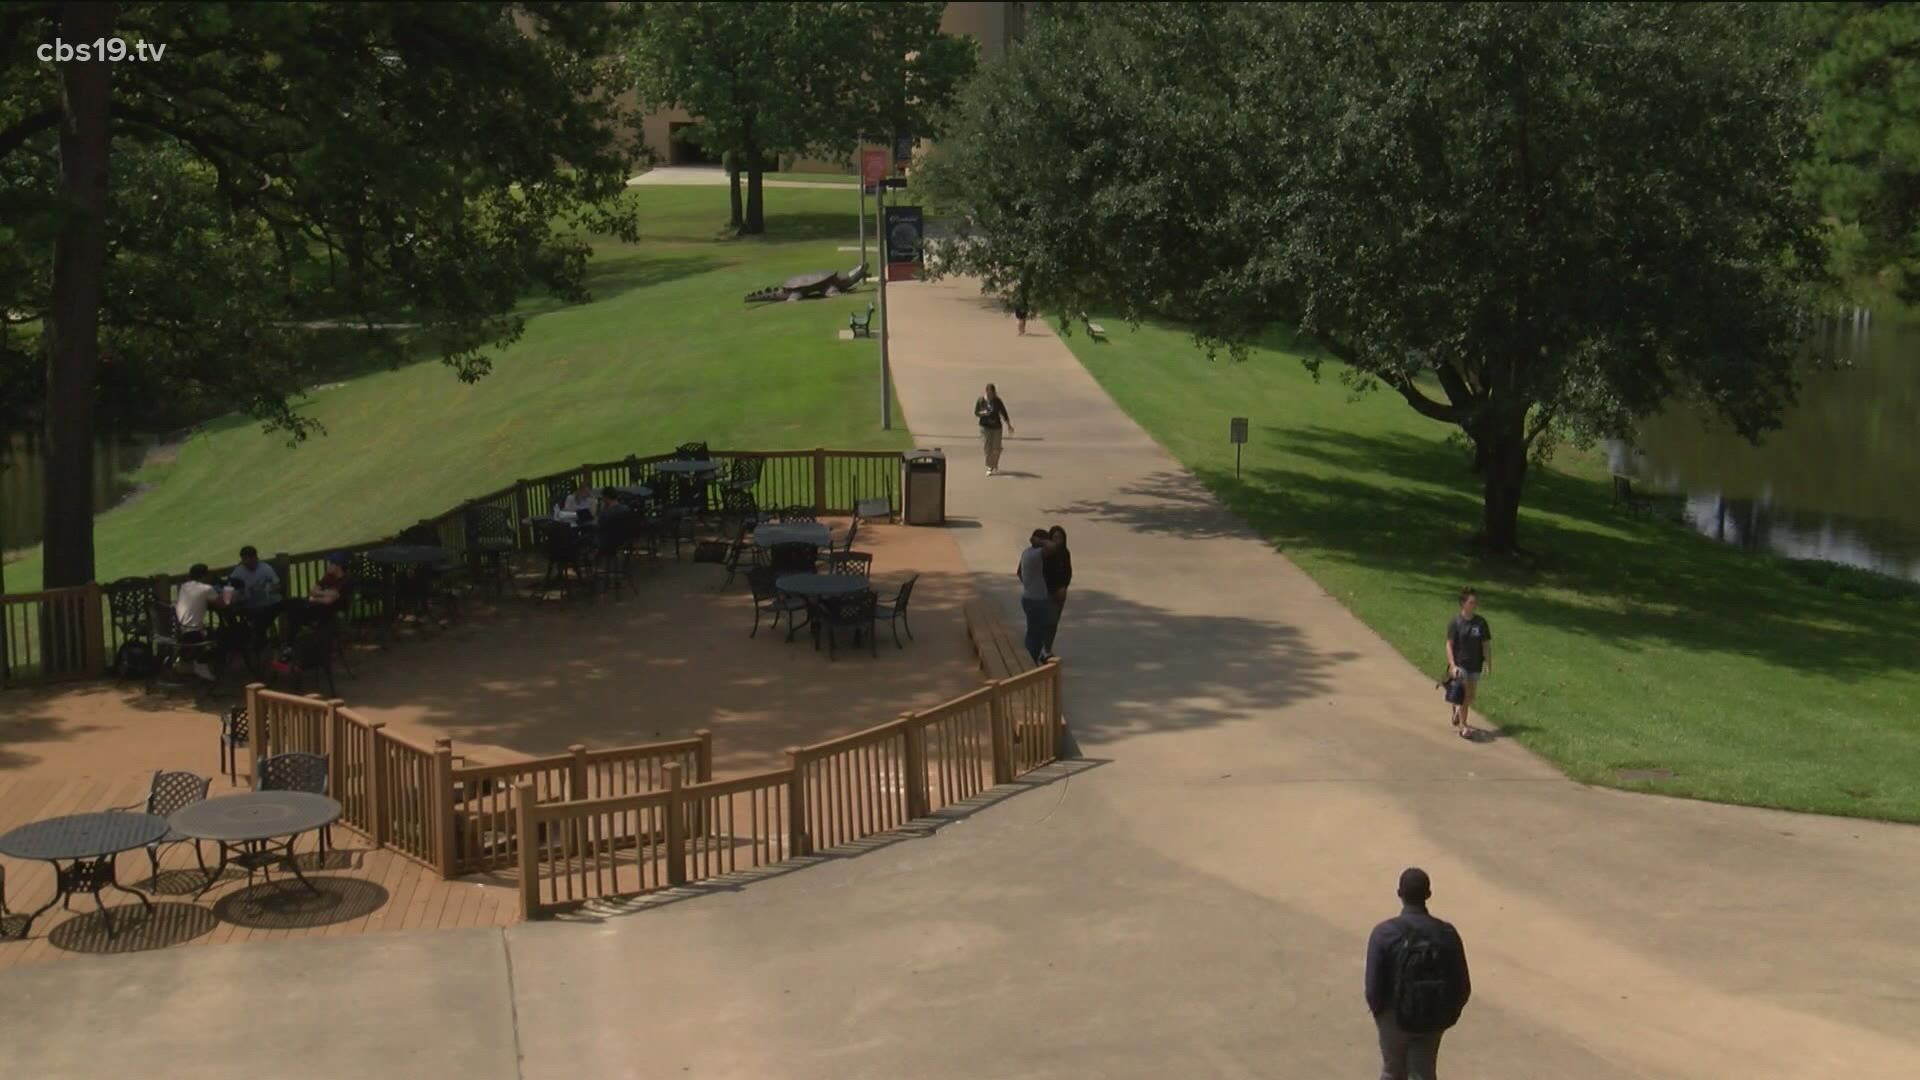 UT Tyler says keeping its campus "healthy remains our top priority."